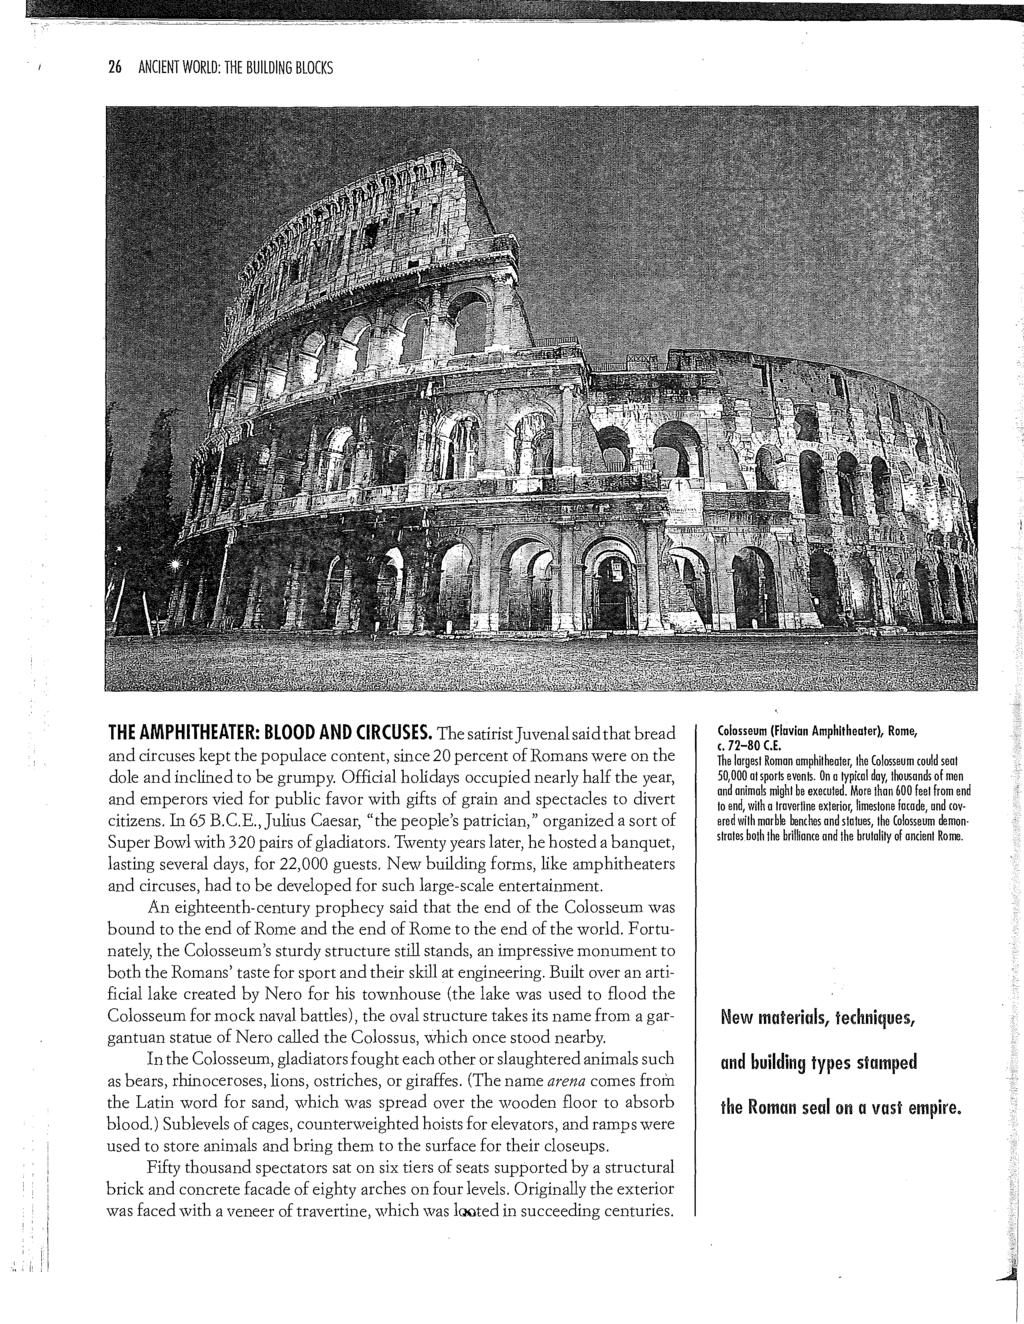 NV* 26 ANCIENT WORLD: THE BUILDING BLOCKS THE AMPHITHEATER: BLOOD AND CIRCUSES.